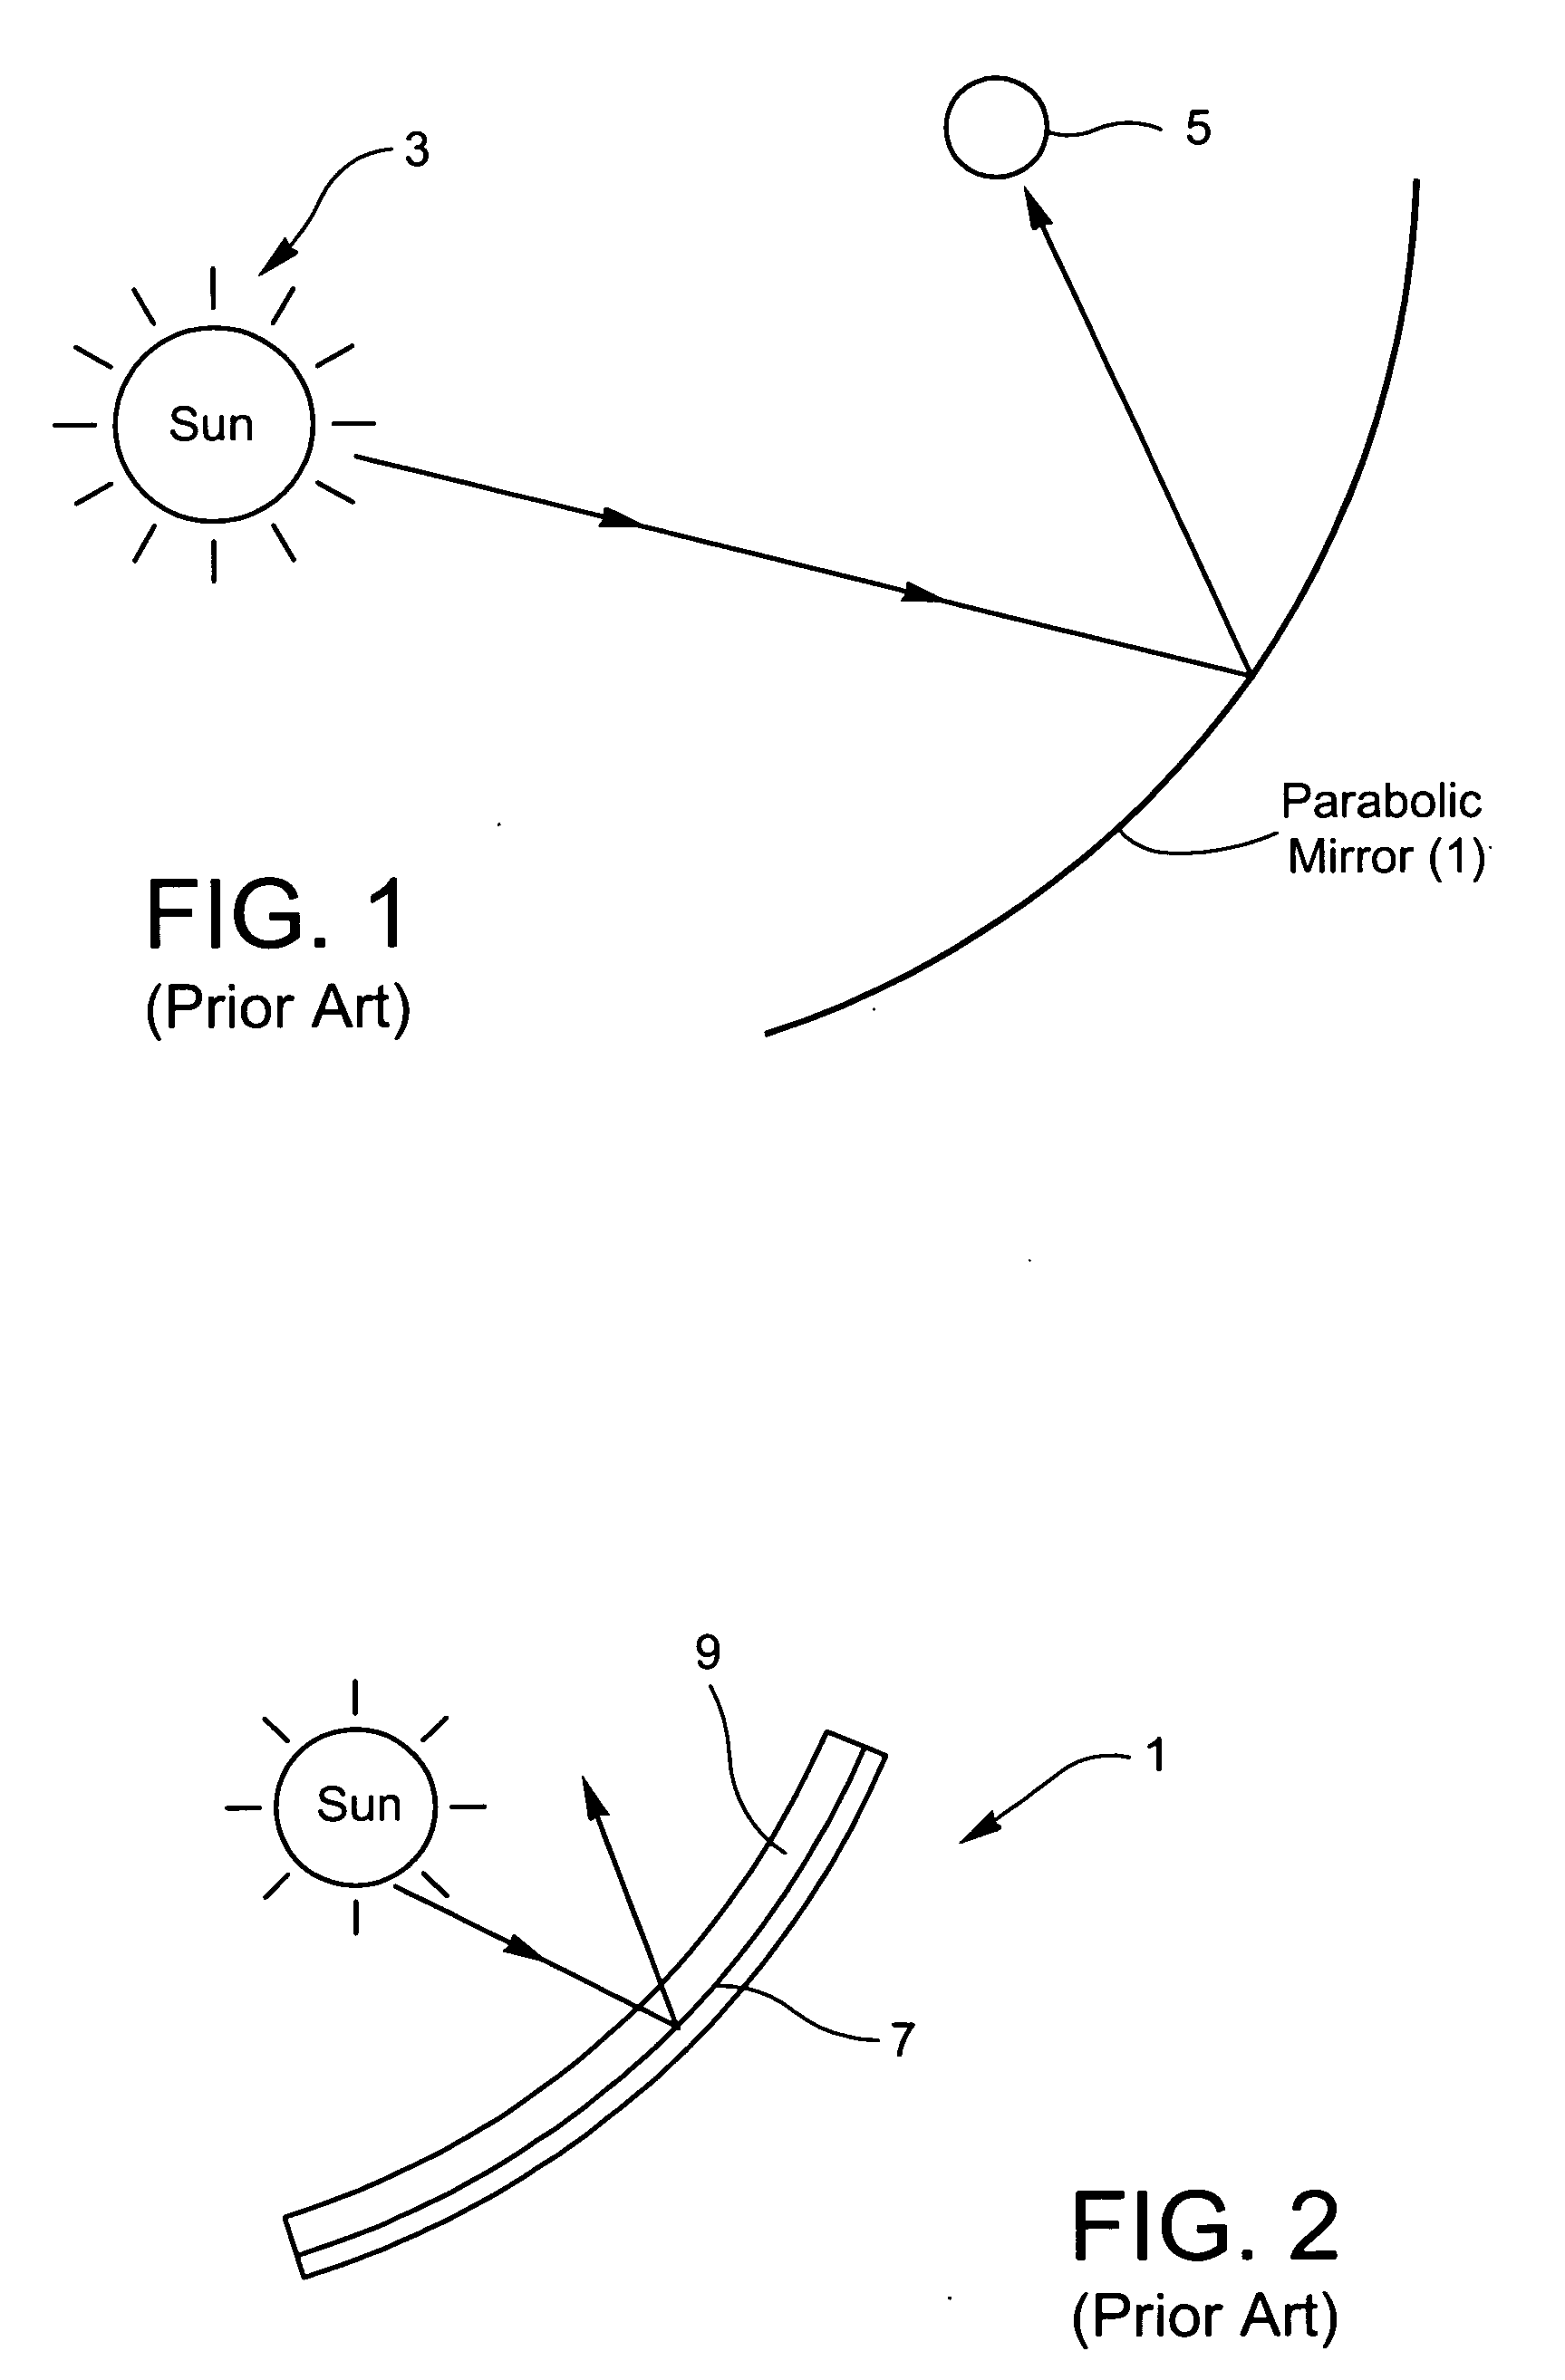 First surface mirror with sol-gel applied protective coating for use in solar collector or the like